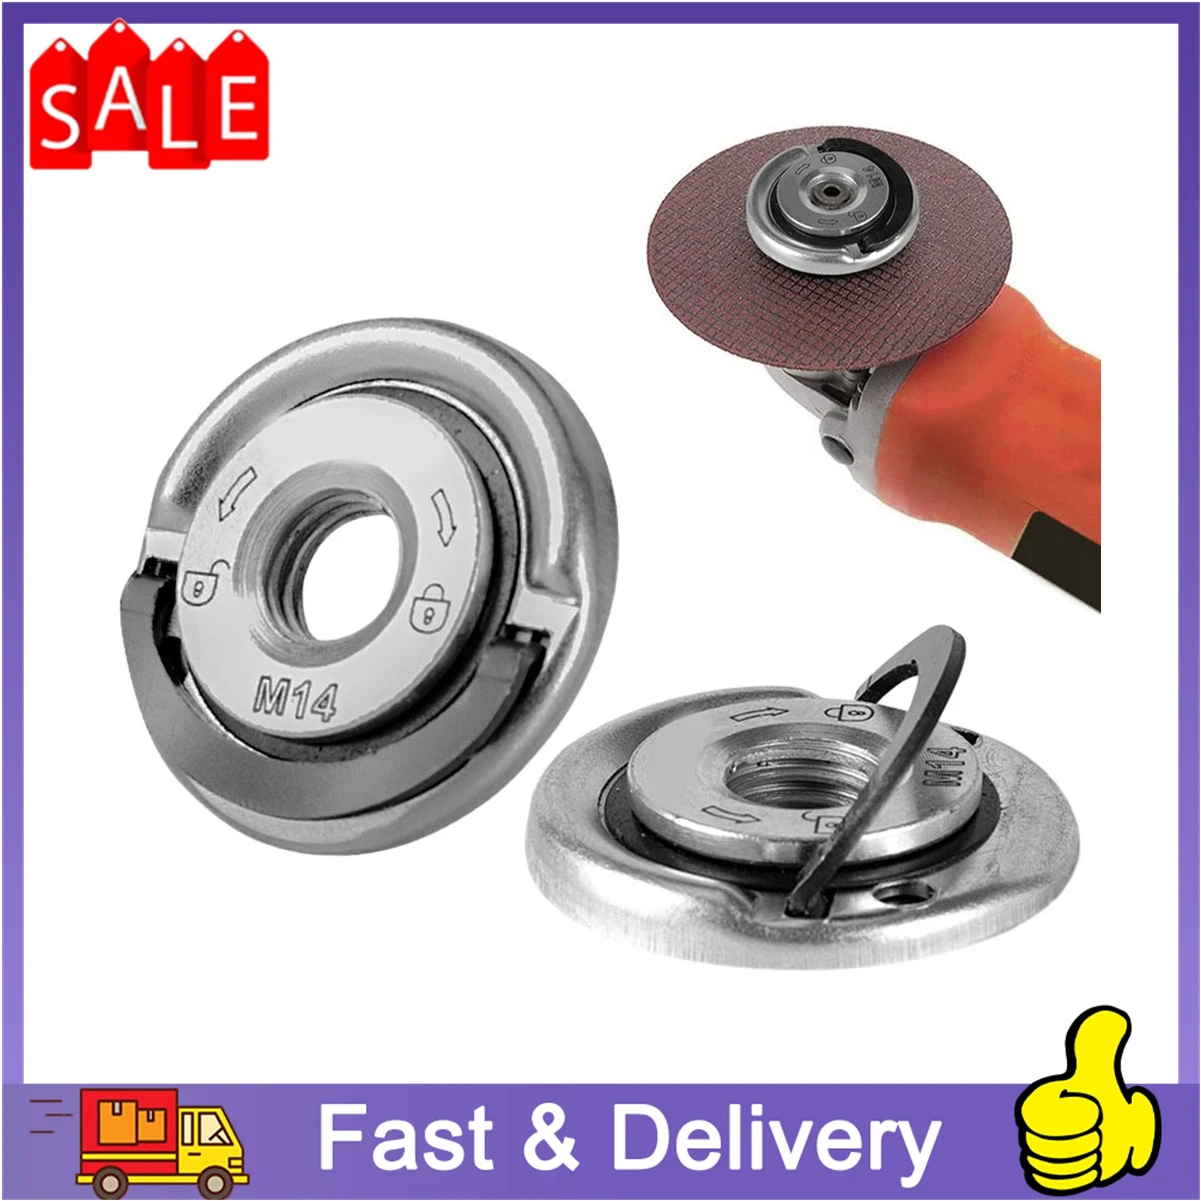 Quick Release Flange Nut M14 Thread Angle Grinder Release Locking Nut Pressing Plate For Angle Grinder Clamping Flange Accessory hexagon flange nut pressure plate for angle grinder 100 type disc quick change locking nut quick release angle grinder accessory